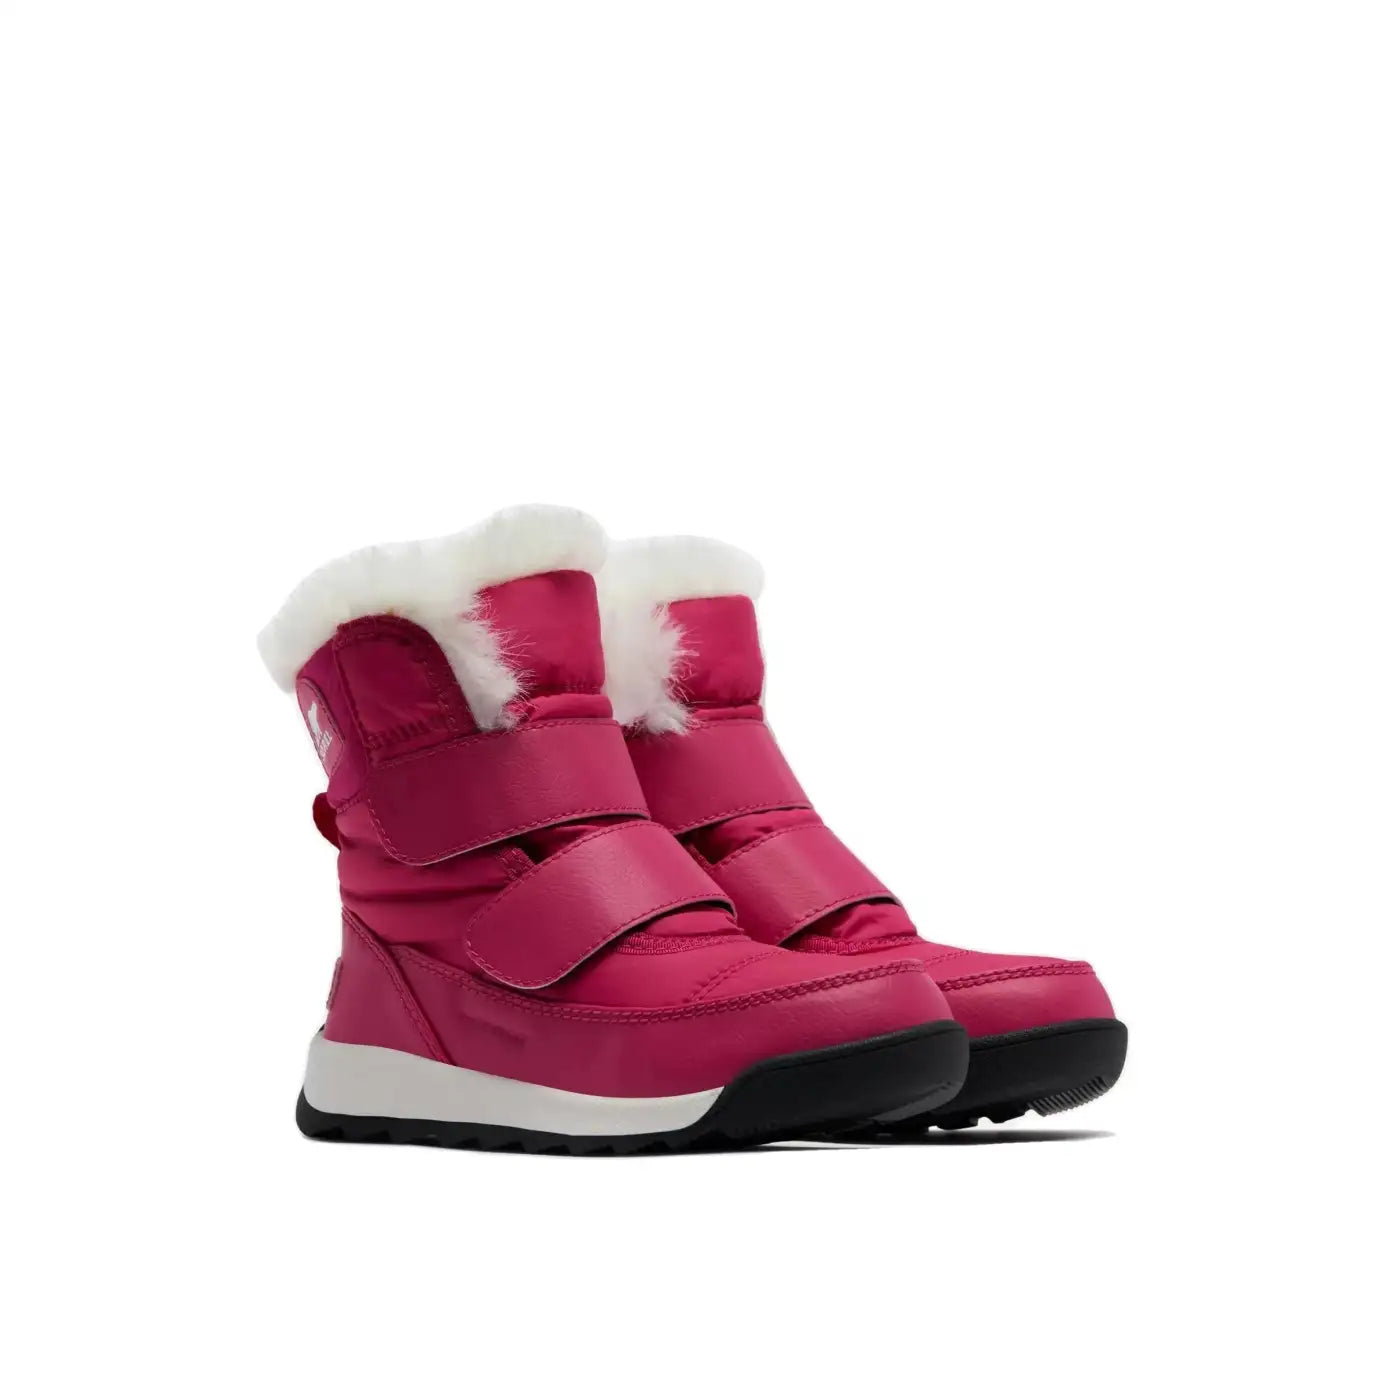 Sorel Toddler Whitney II Strap Boot, Cactus Pink Black, front and side view 